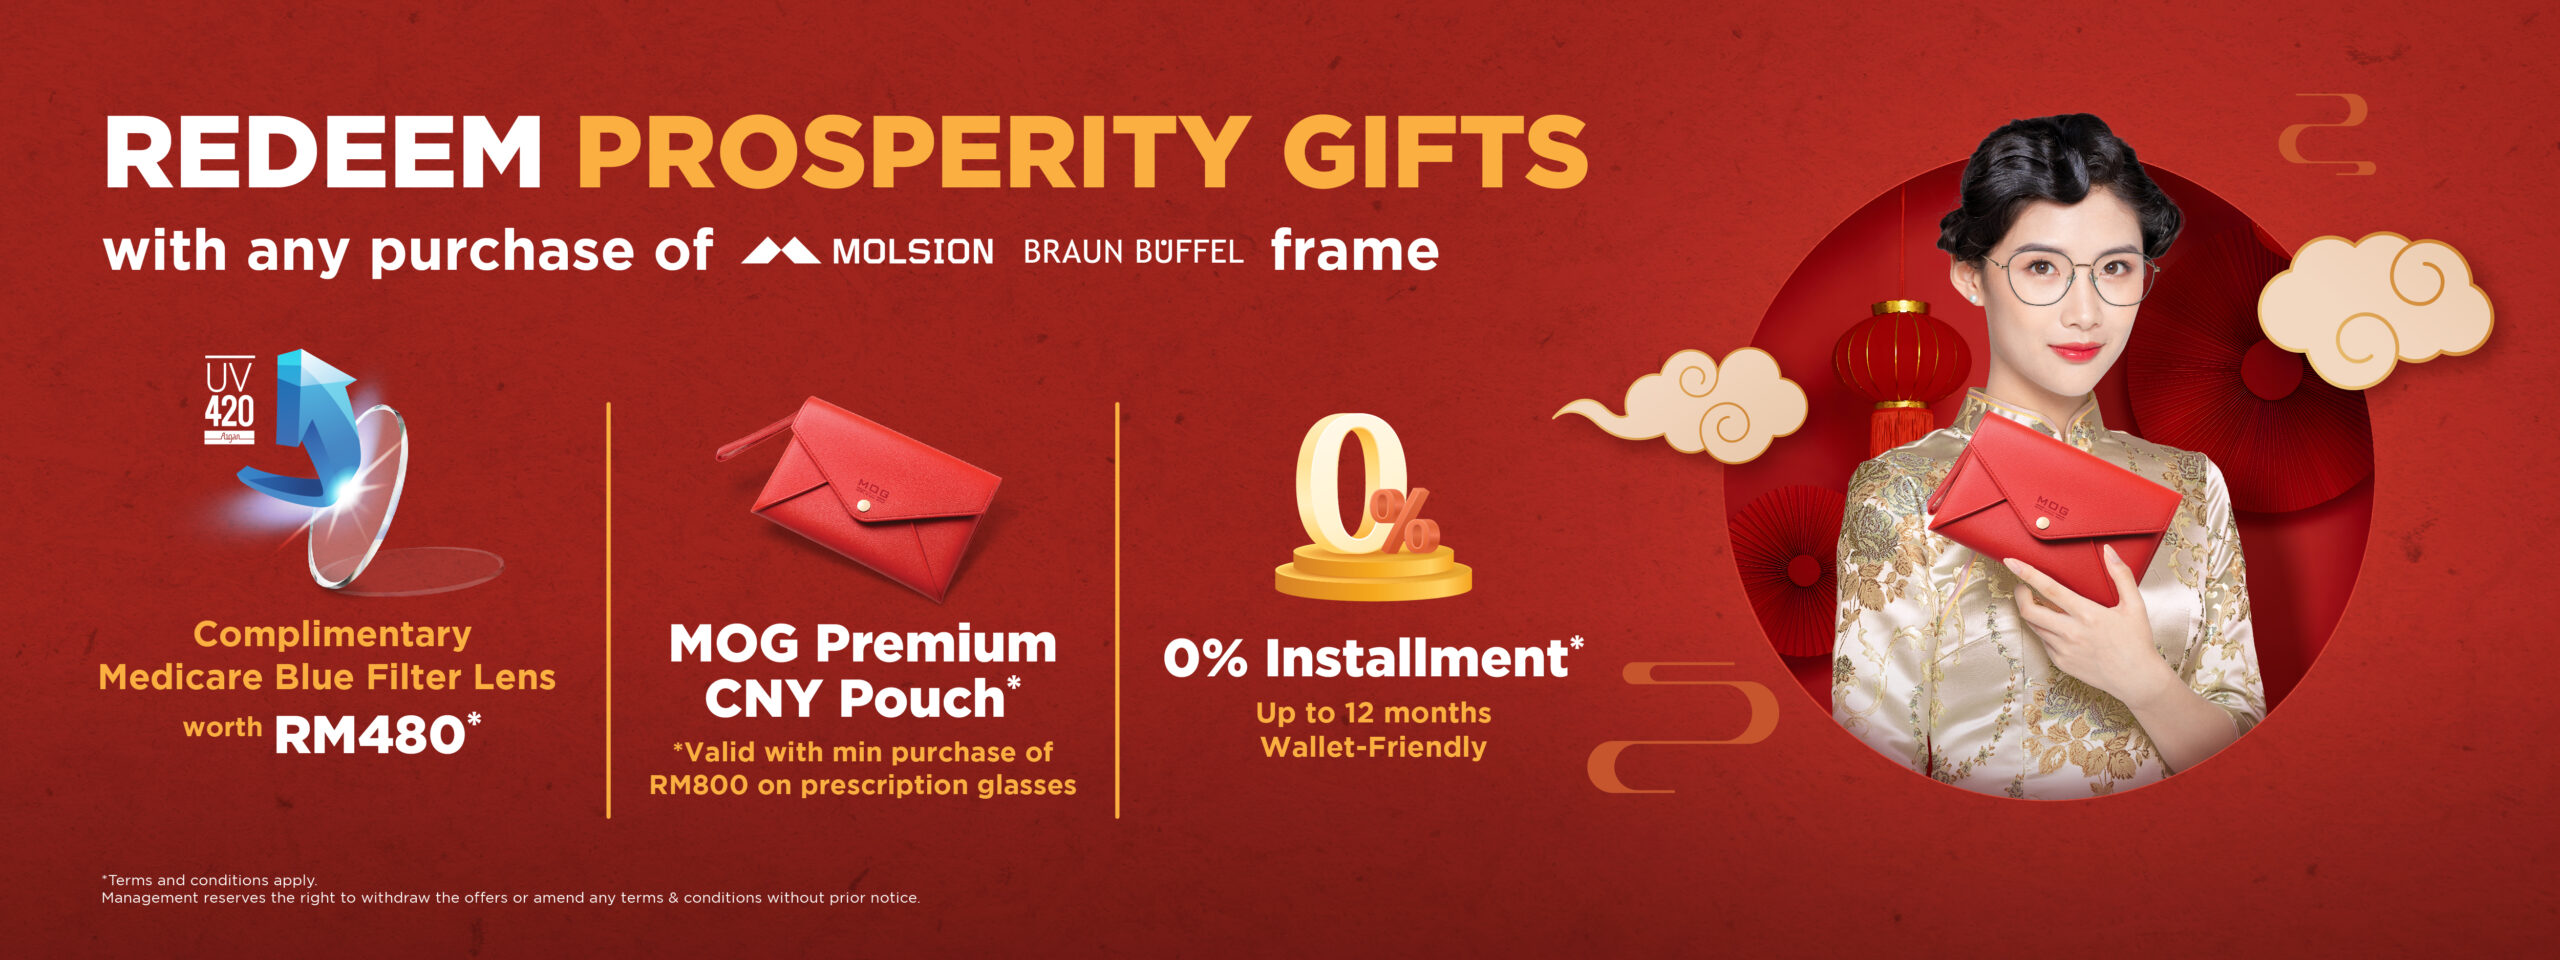 New Year, New Frame, New Beginnings! Celebrate the Lunar New Year in style with a complimentary premium Chinese New Year Pouch with a minimum purchase of RM800 on Molsion & Braun Buffel prescription glasses.